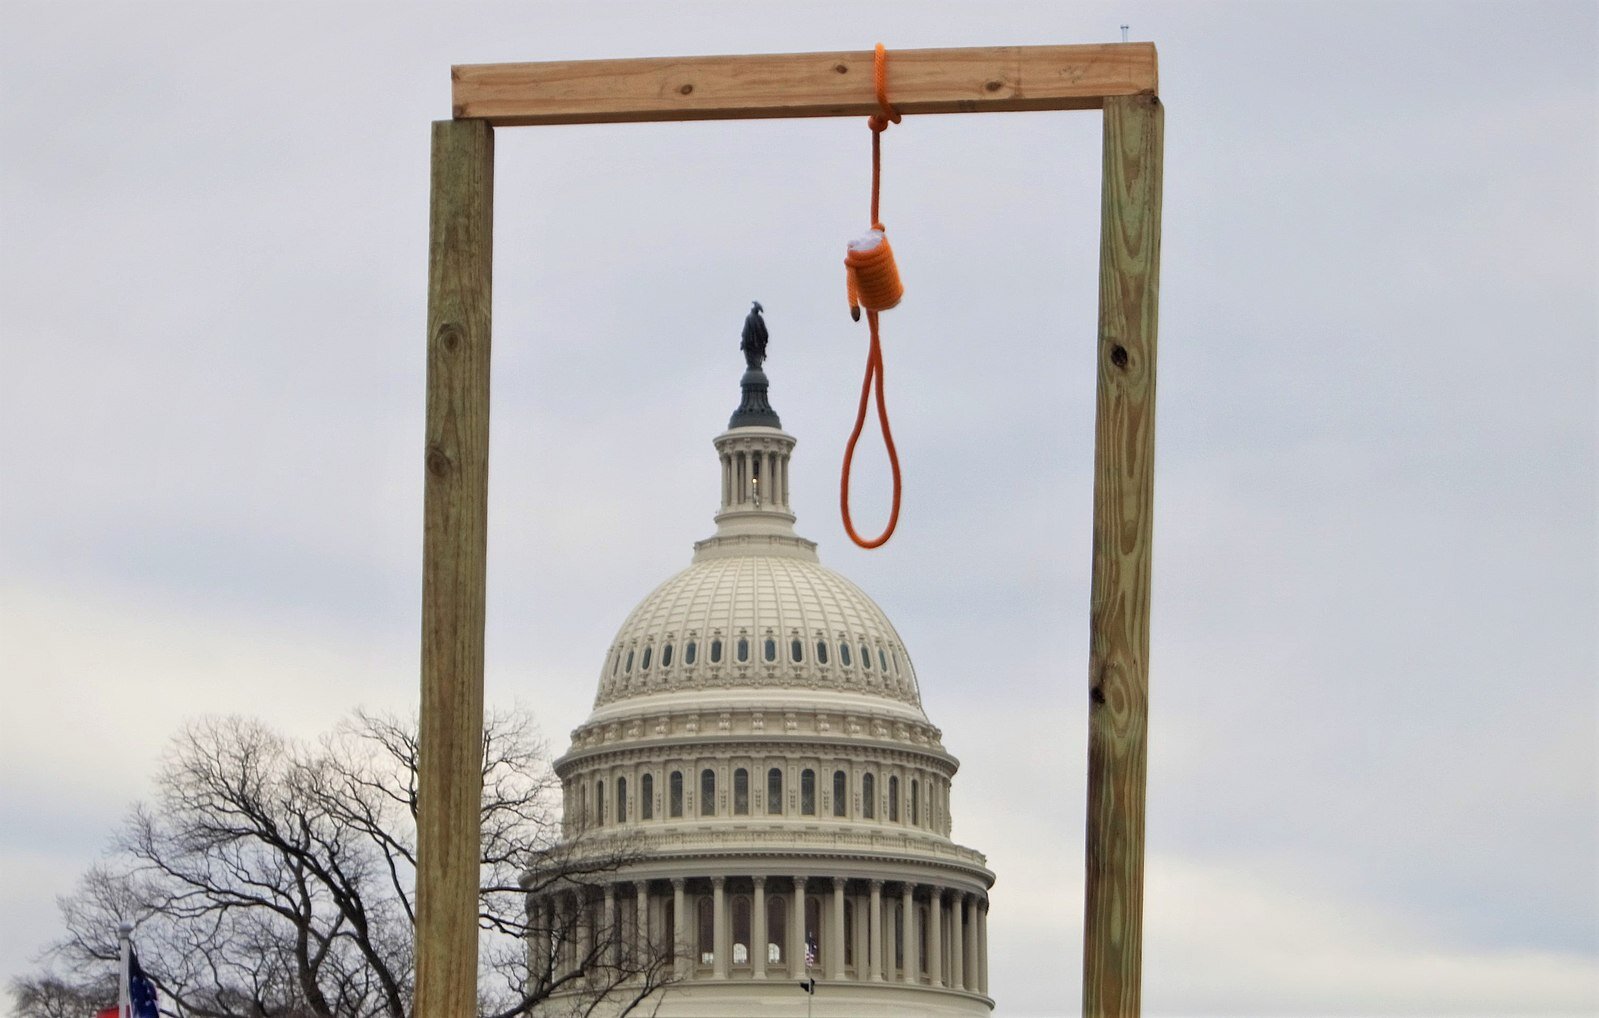 A gallows hangs near the United States Capitol during the 2021 storming of the United States Capitol (Photo by Tyler Merbler | Wikimedia Commons)